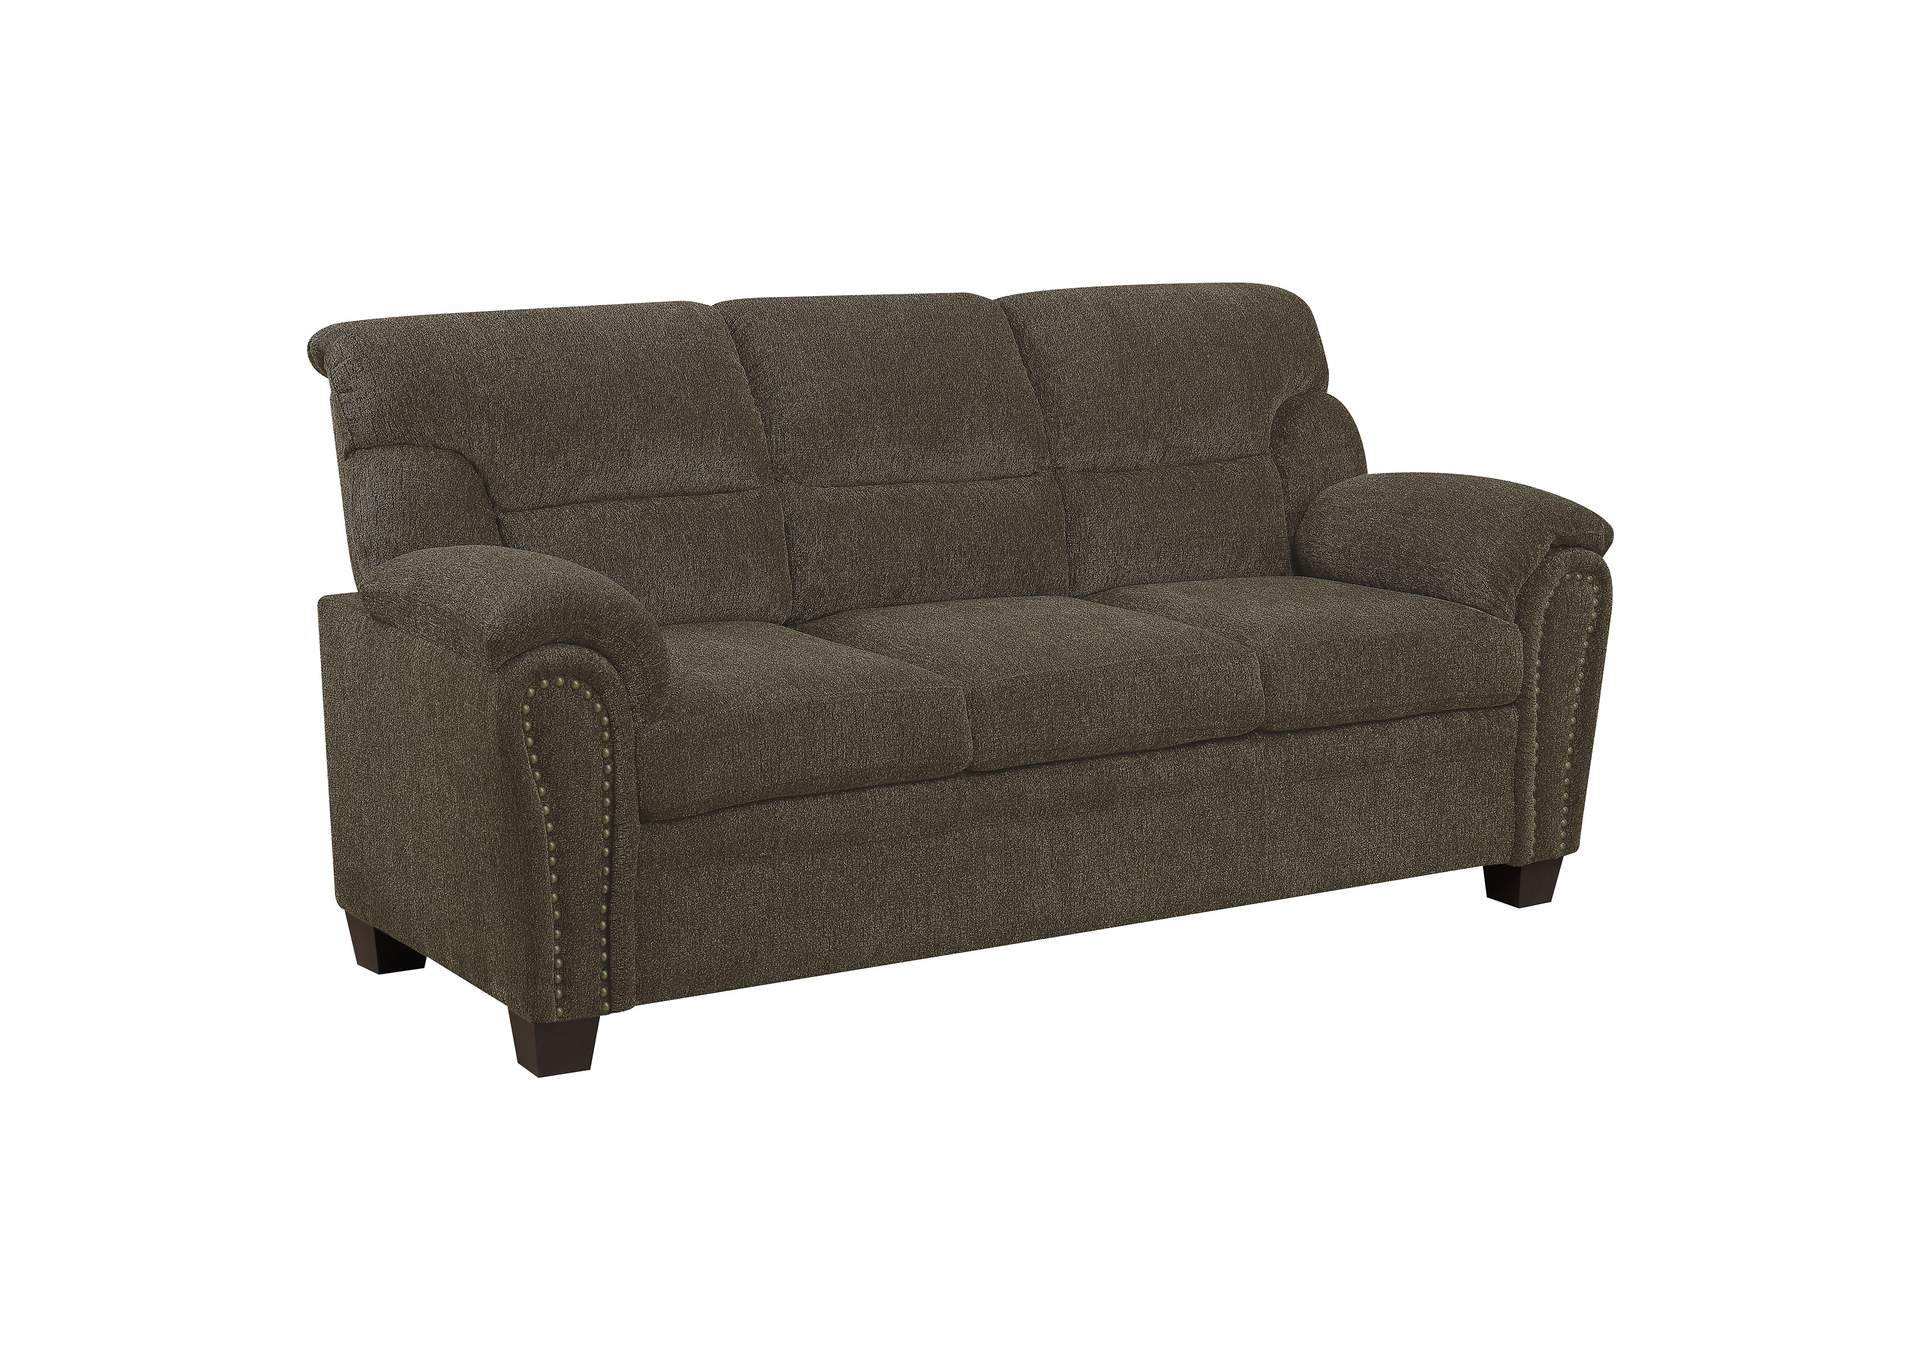 Clementine Upholstered Sofa with Nailhead Trim Brown,Coaster Furniture